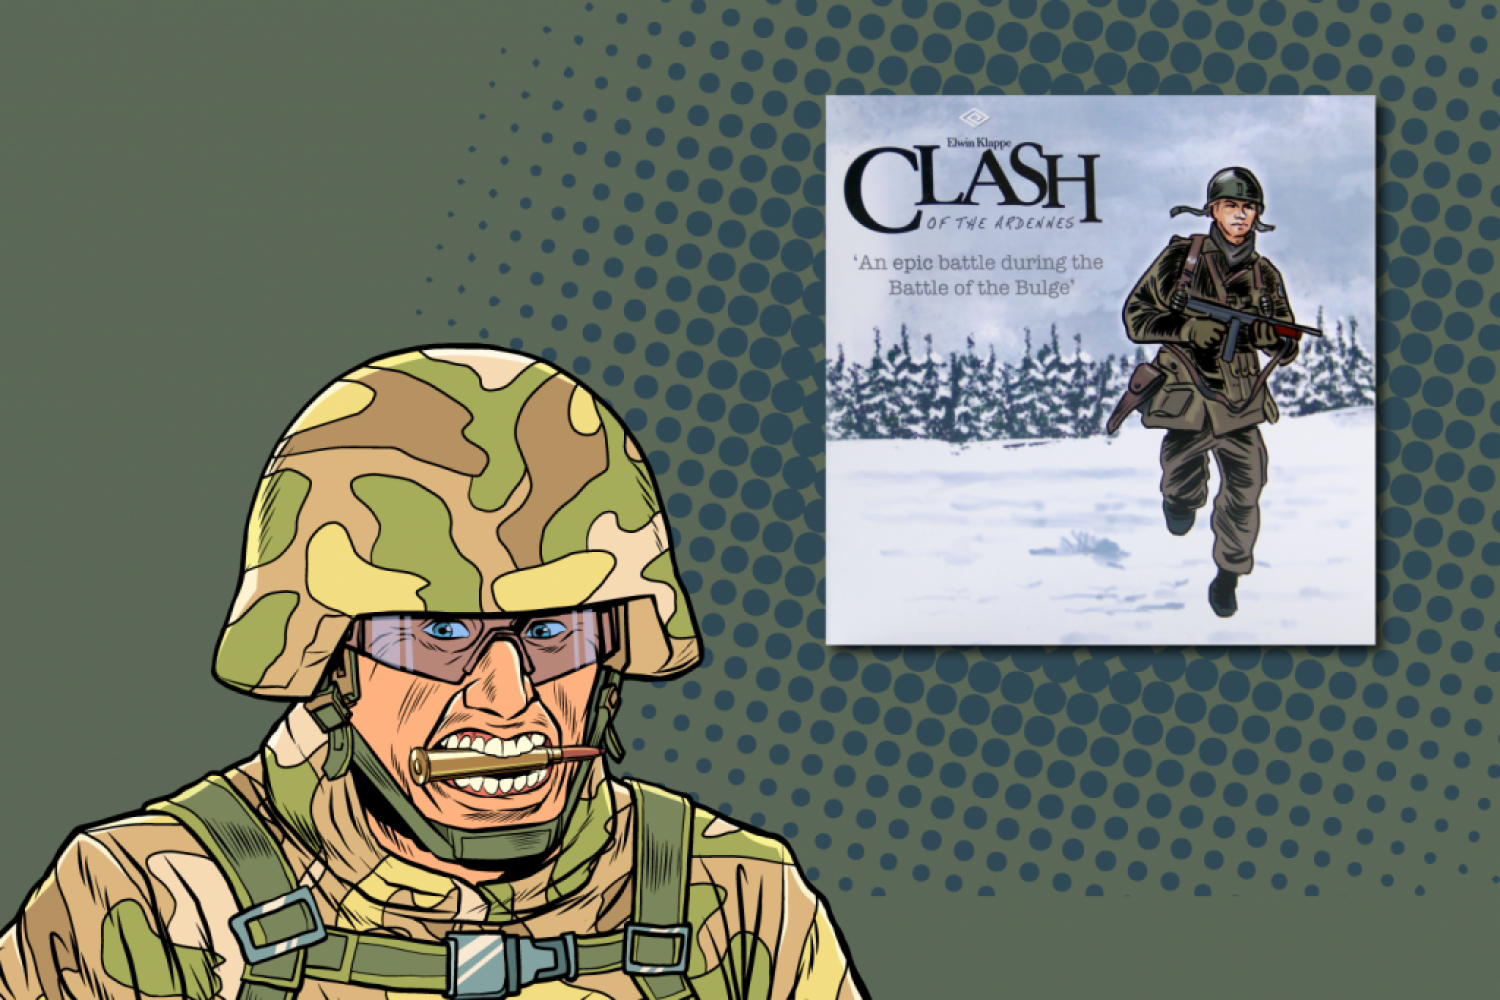 Clash-of-the-Ardennes-Header-Image